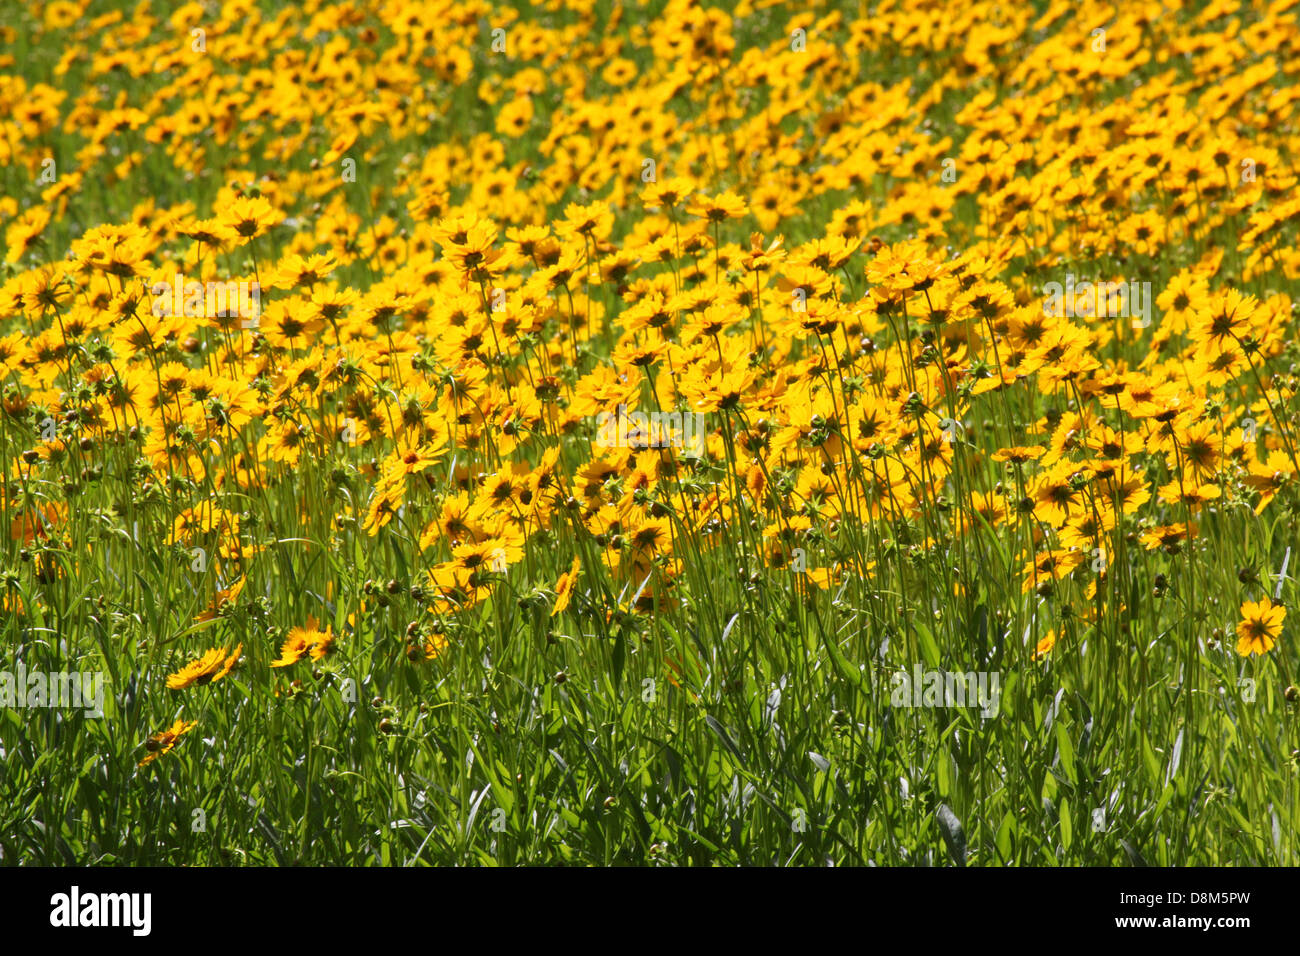 yellow flowers in a garden Stock Photo